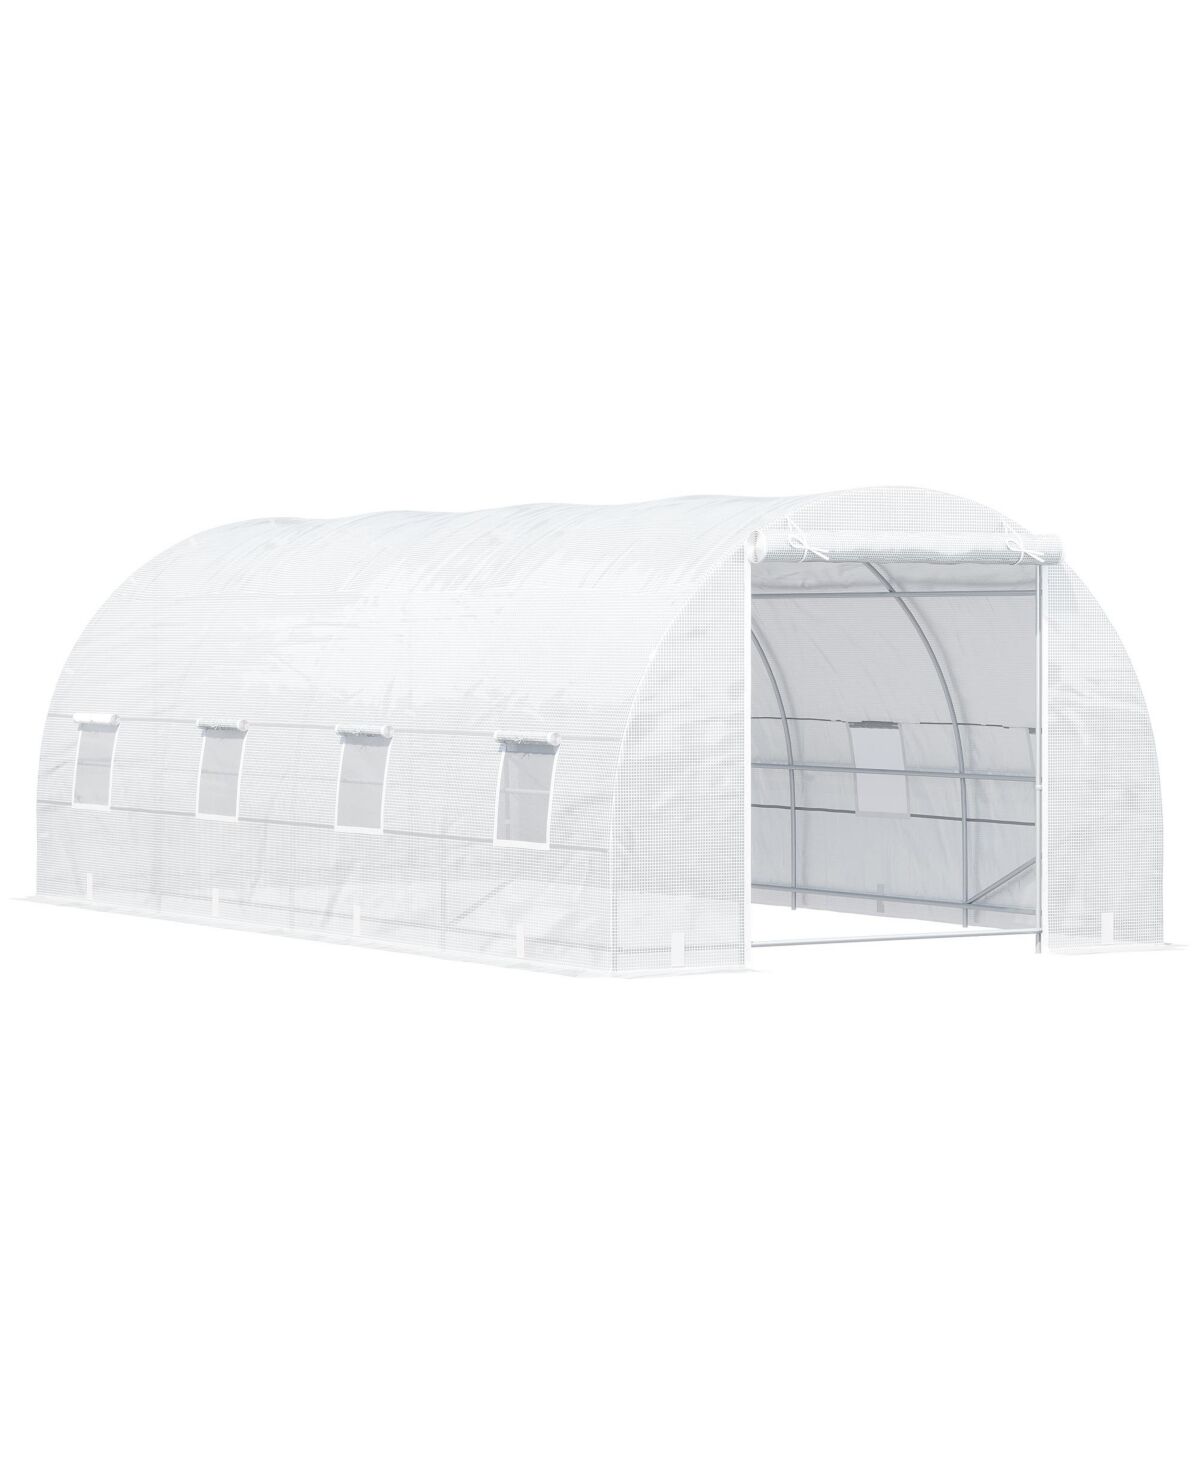 Outsunny 20x10x7ft Heavy Duty Walk-in Greenhouse Outdoor Warm House - White